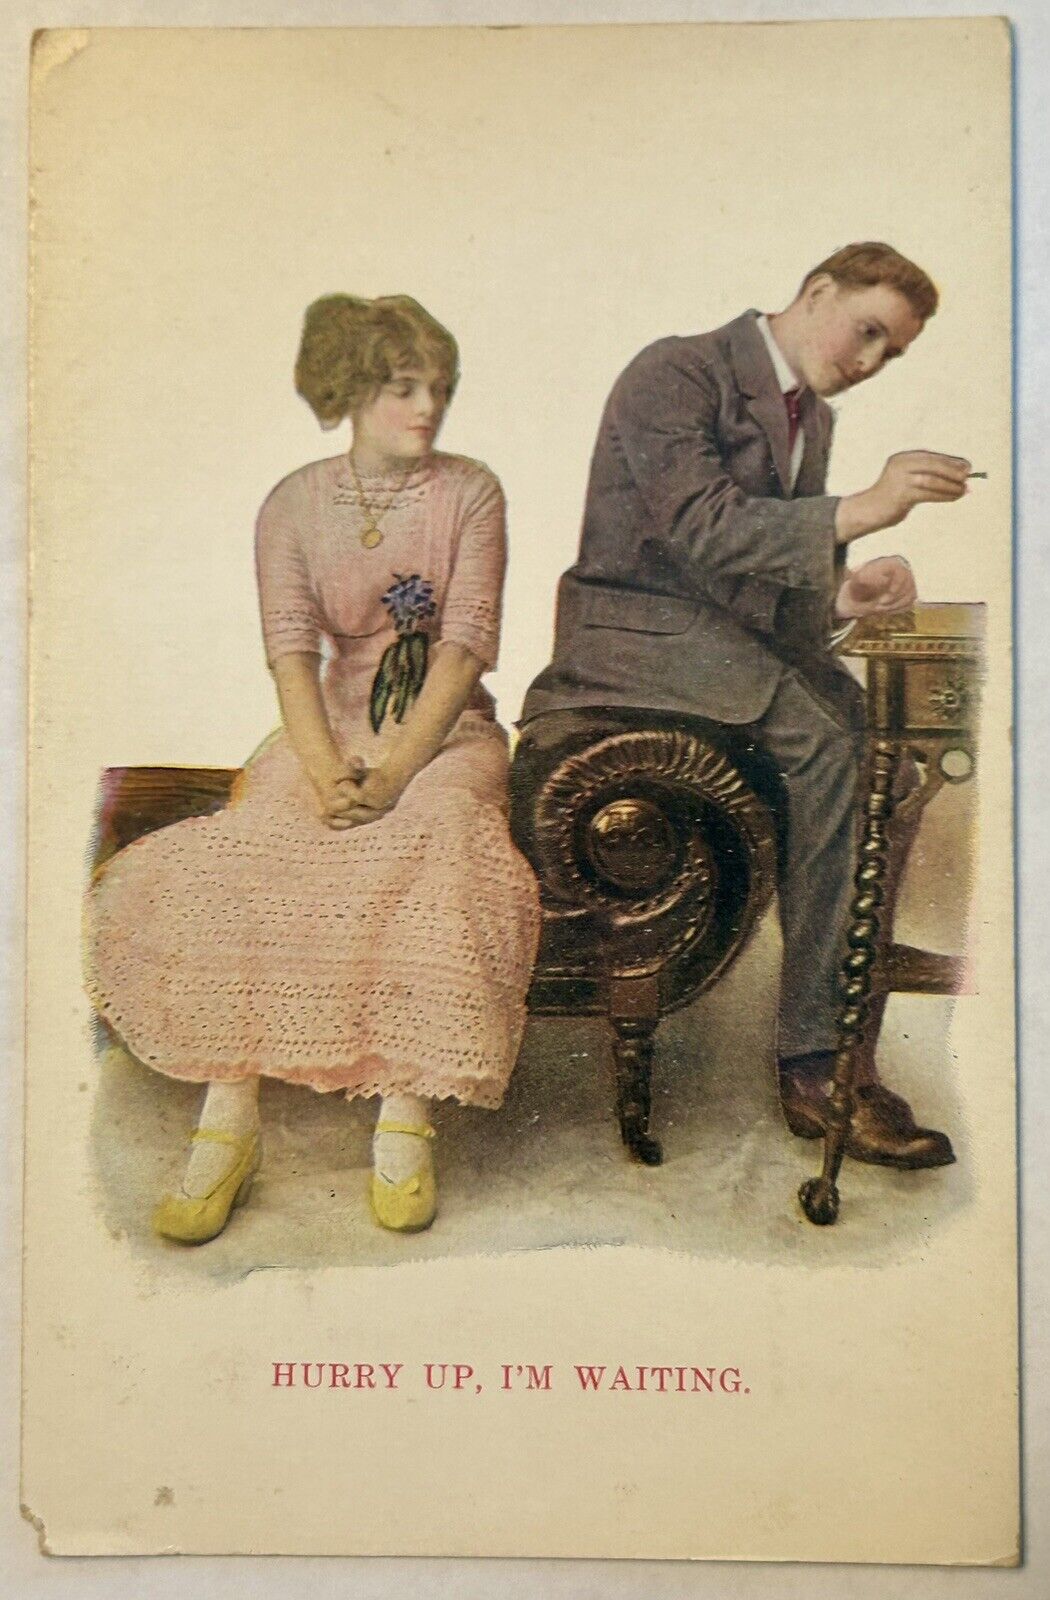 HURRY UP, I\'M WAITING. Vintage love and romance postcard early 1900s.